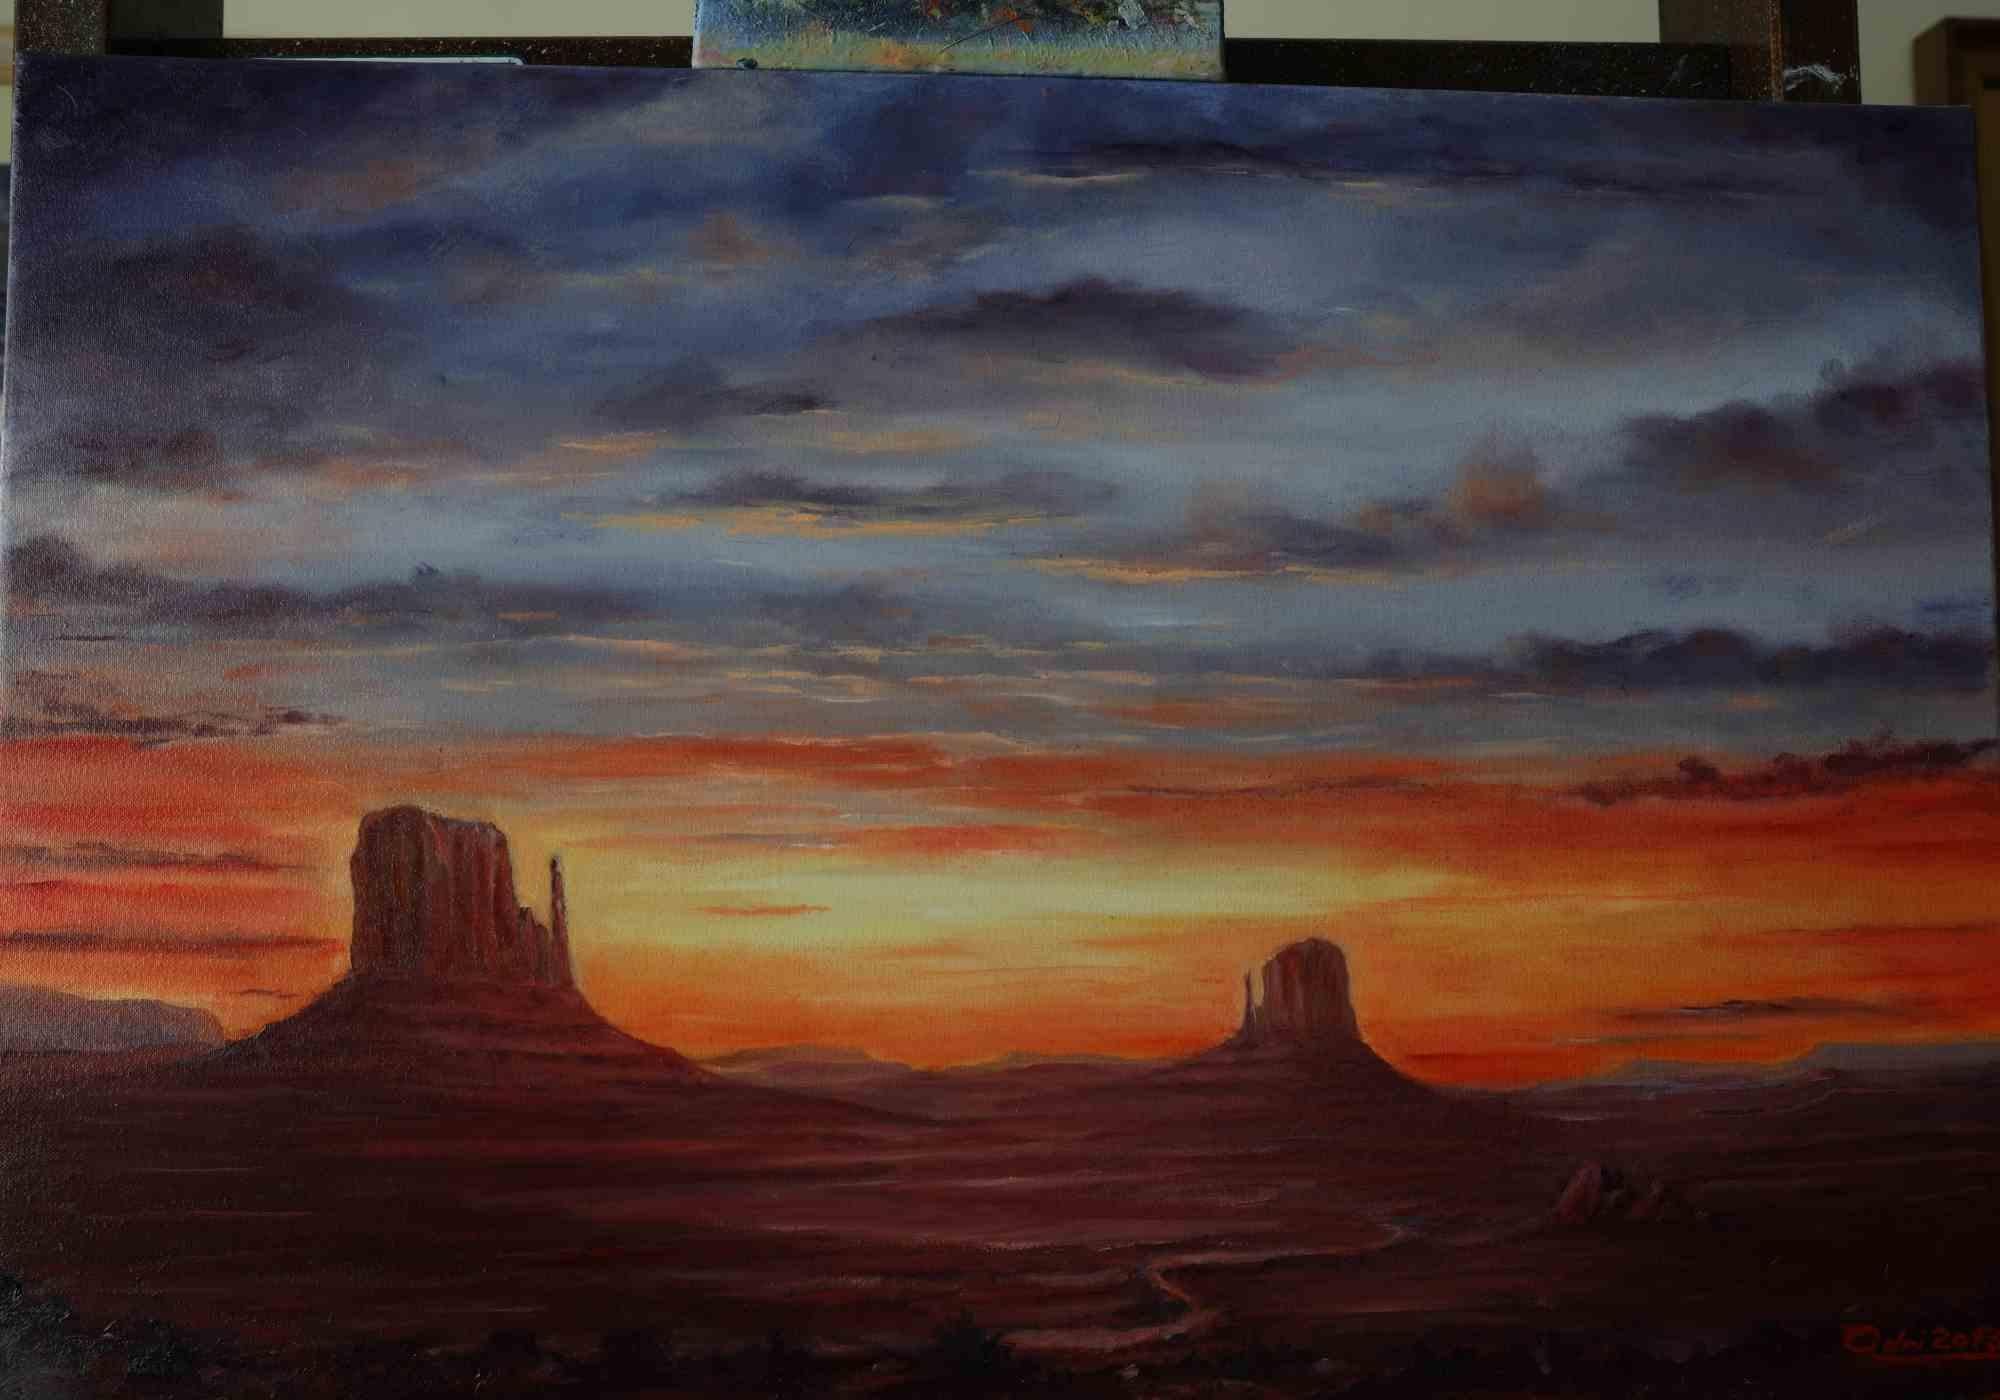 Monument Valley is an original artwork realized by the Italian artist Adriano Bernetti da Vila in 2013.

Hand-signed oil on canvas 40 x 60 cm. The artwork is a representation of the atmosphere and colors percevied by the artist at sunset during a